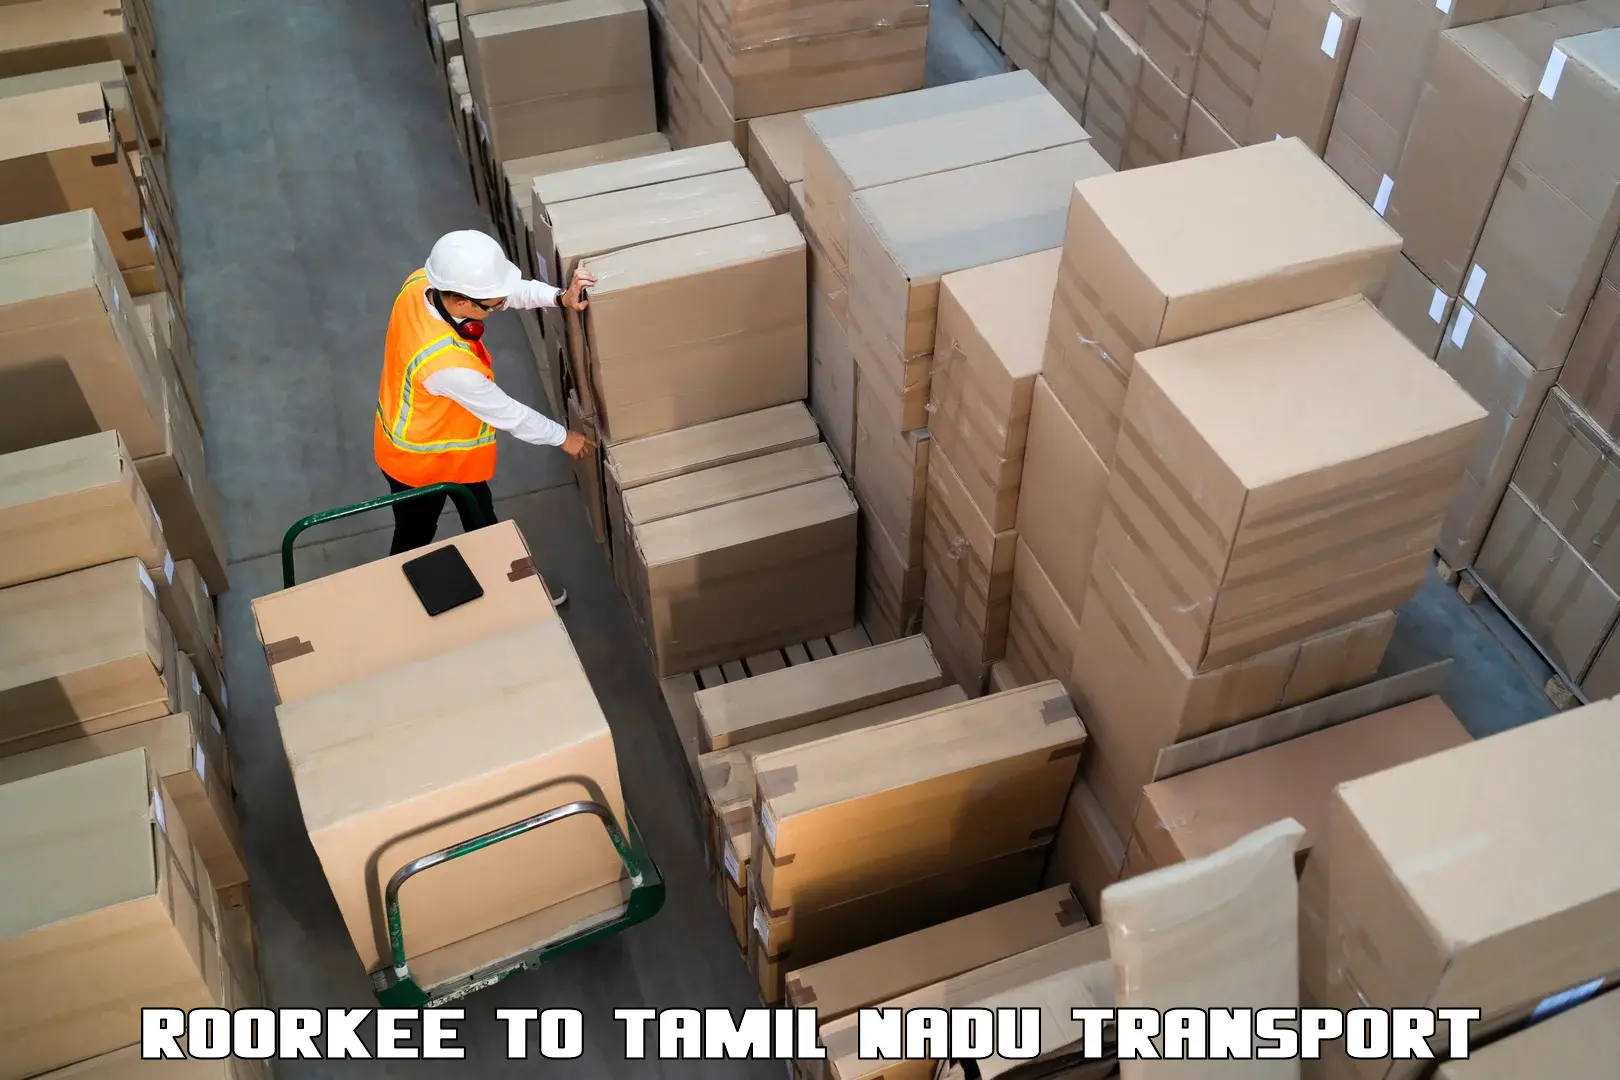 Commercial transport service Roorkee to Periyakulam